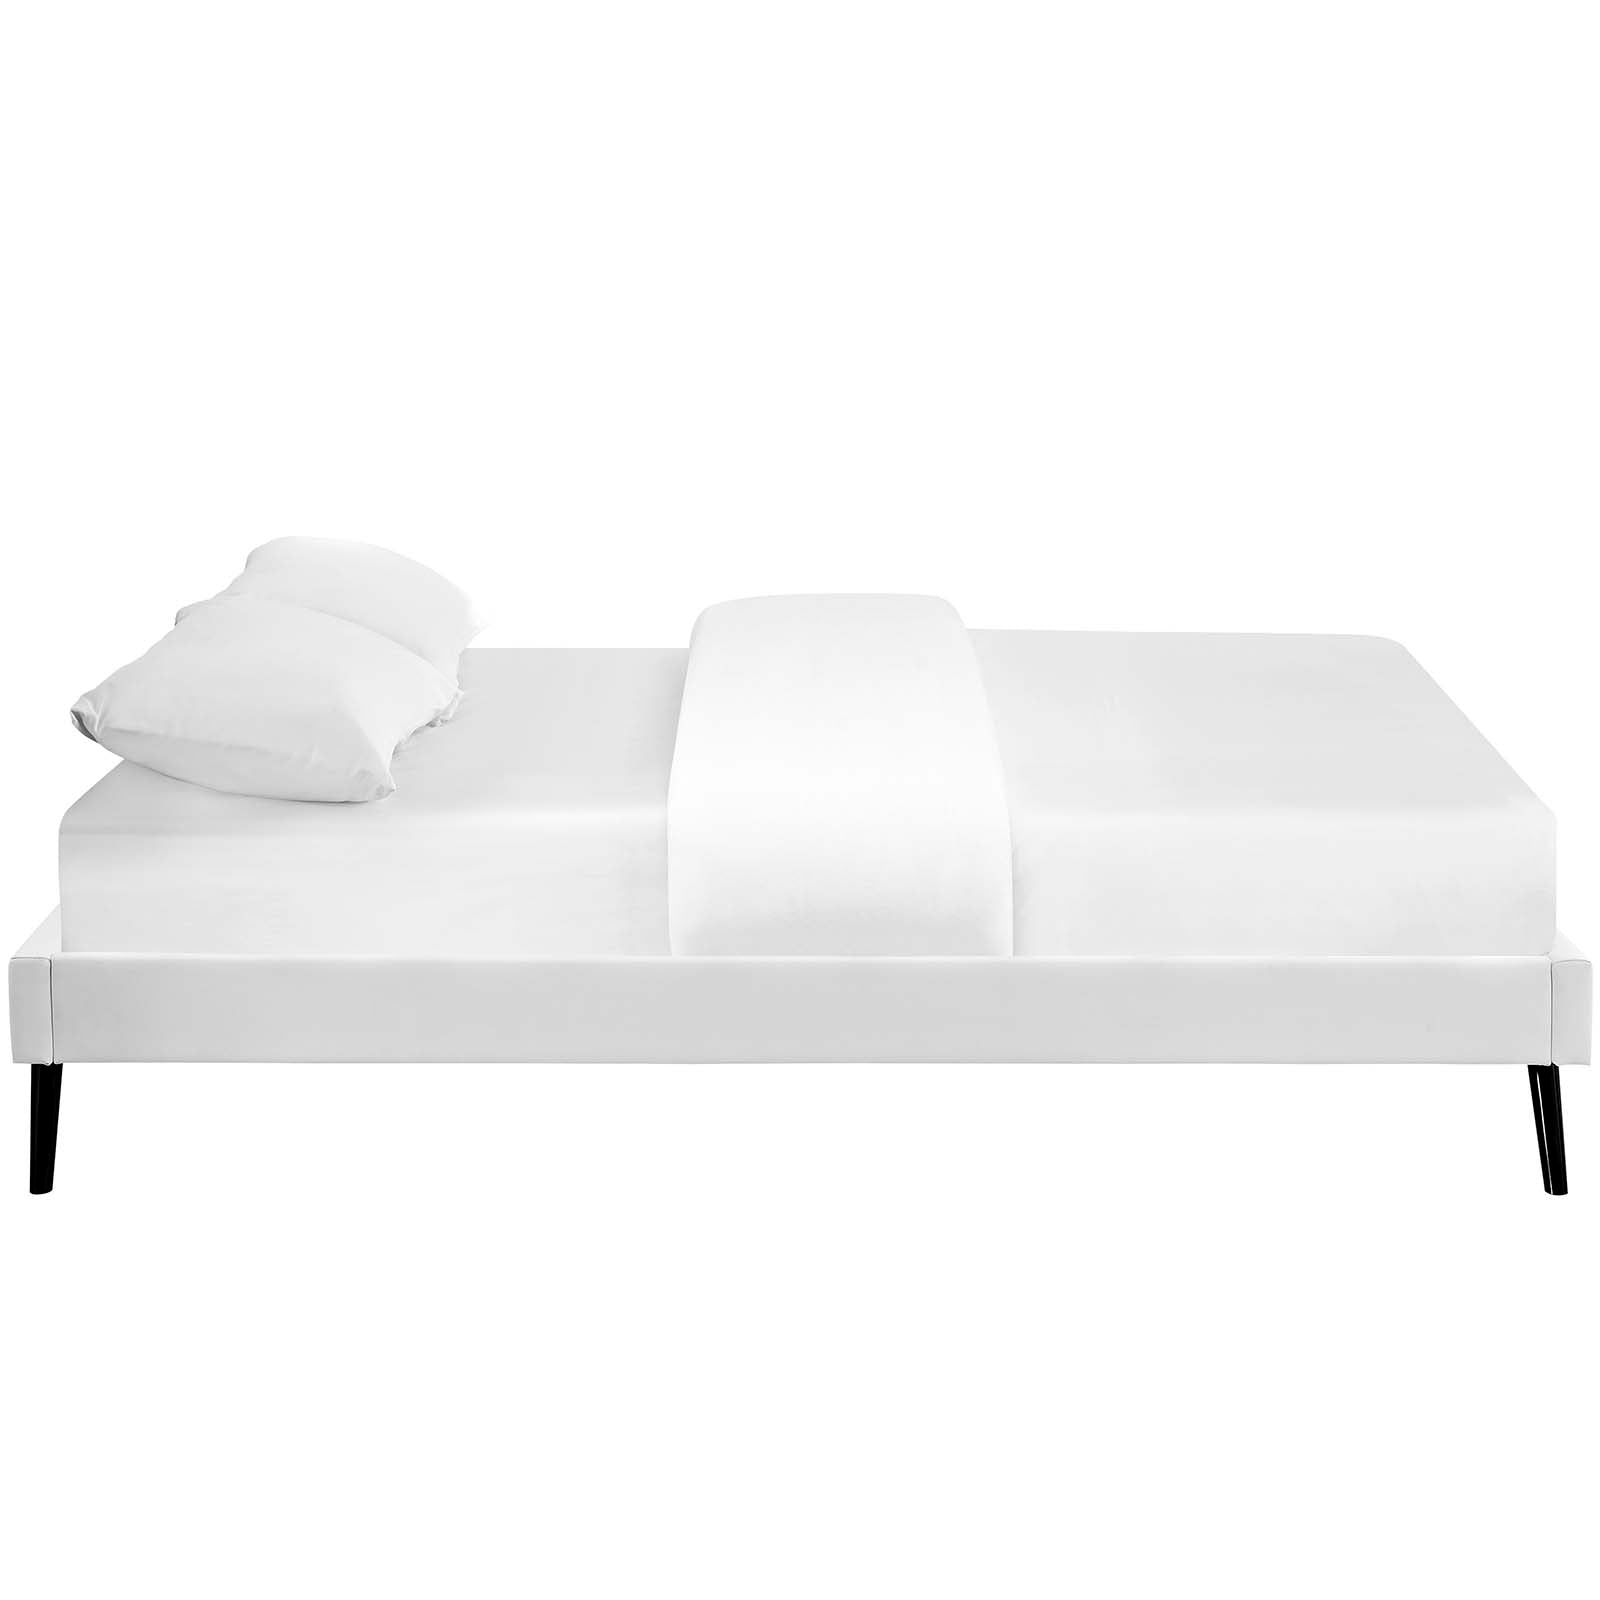 Modway Beds - Loryn King Vinyl Bed Frame with Round Splayed Legs White